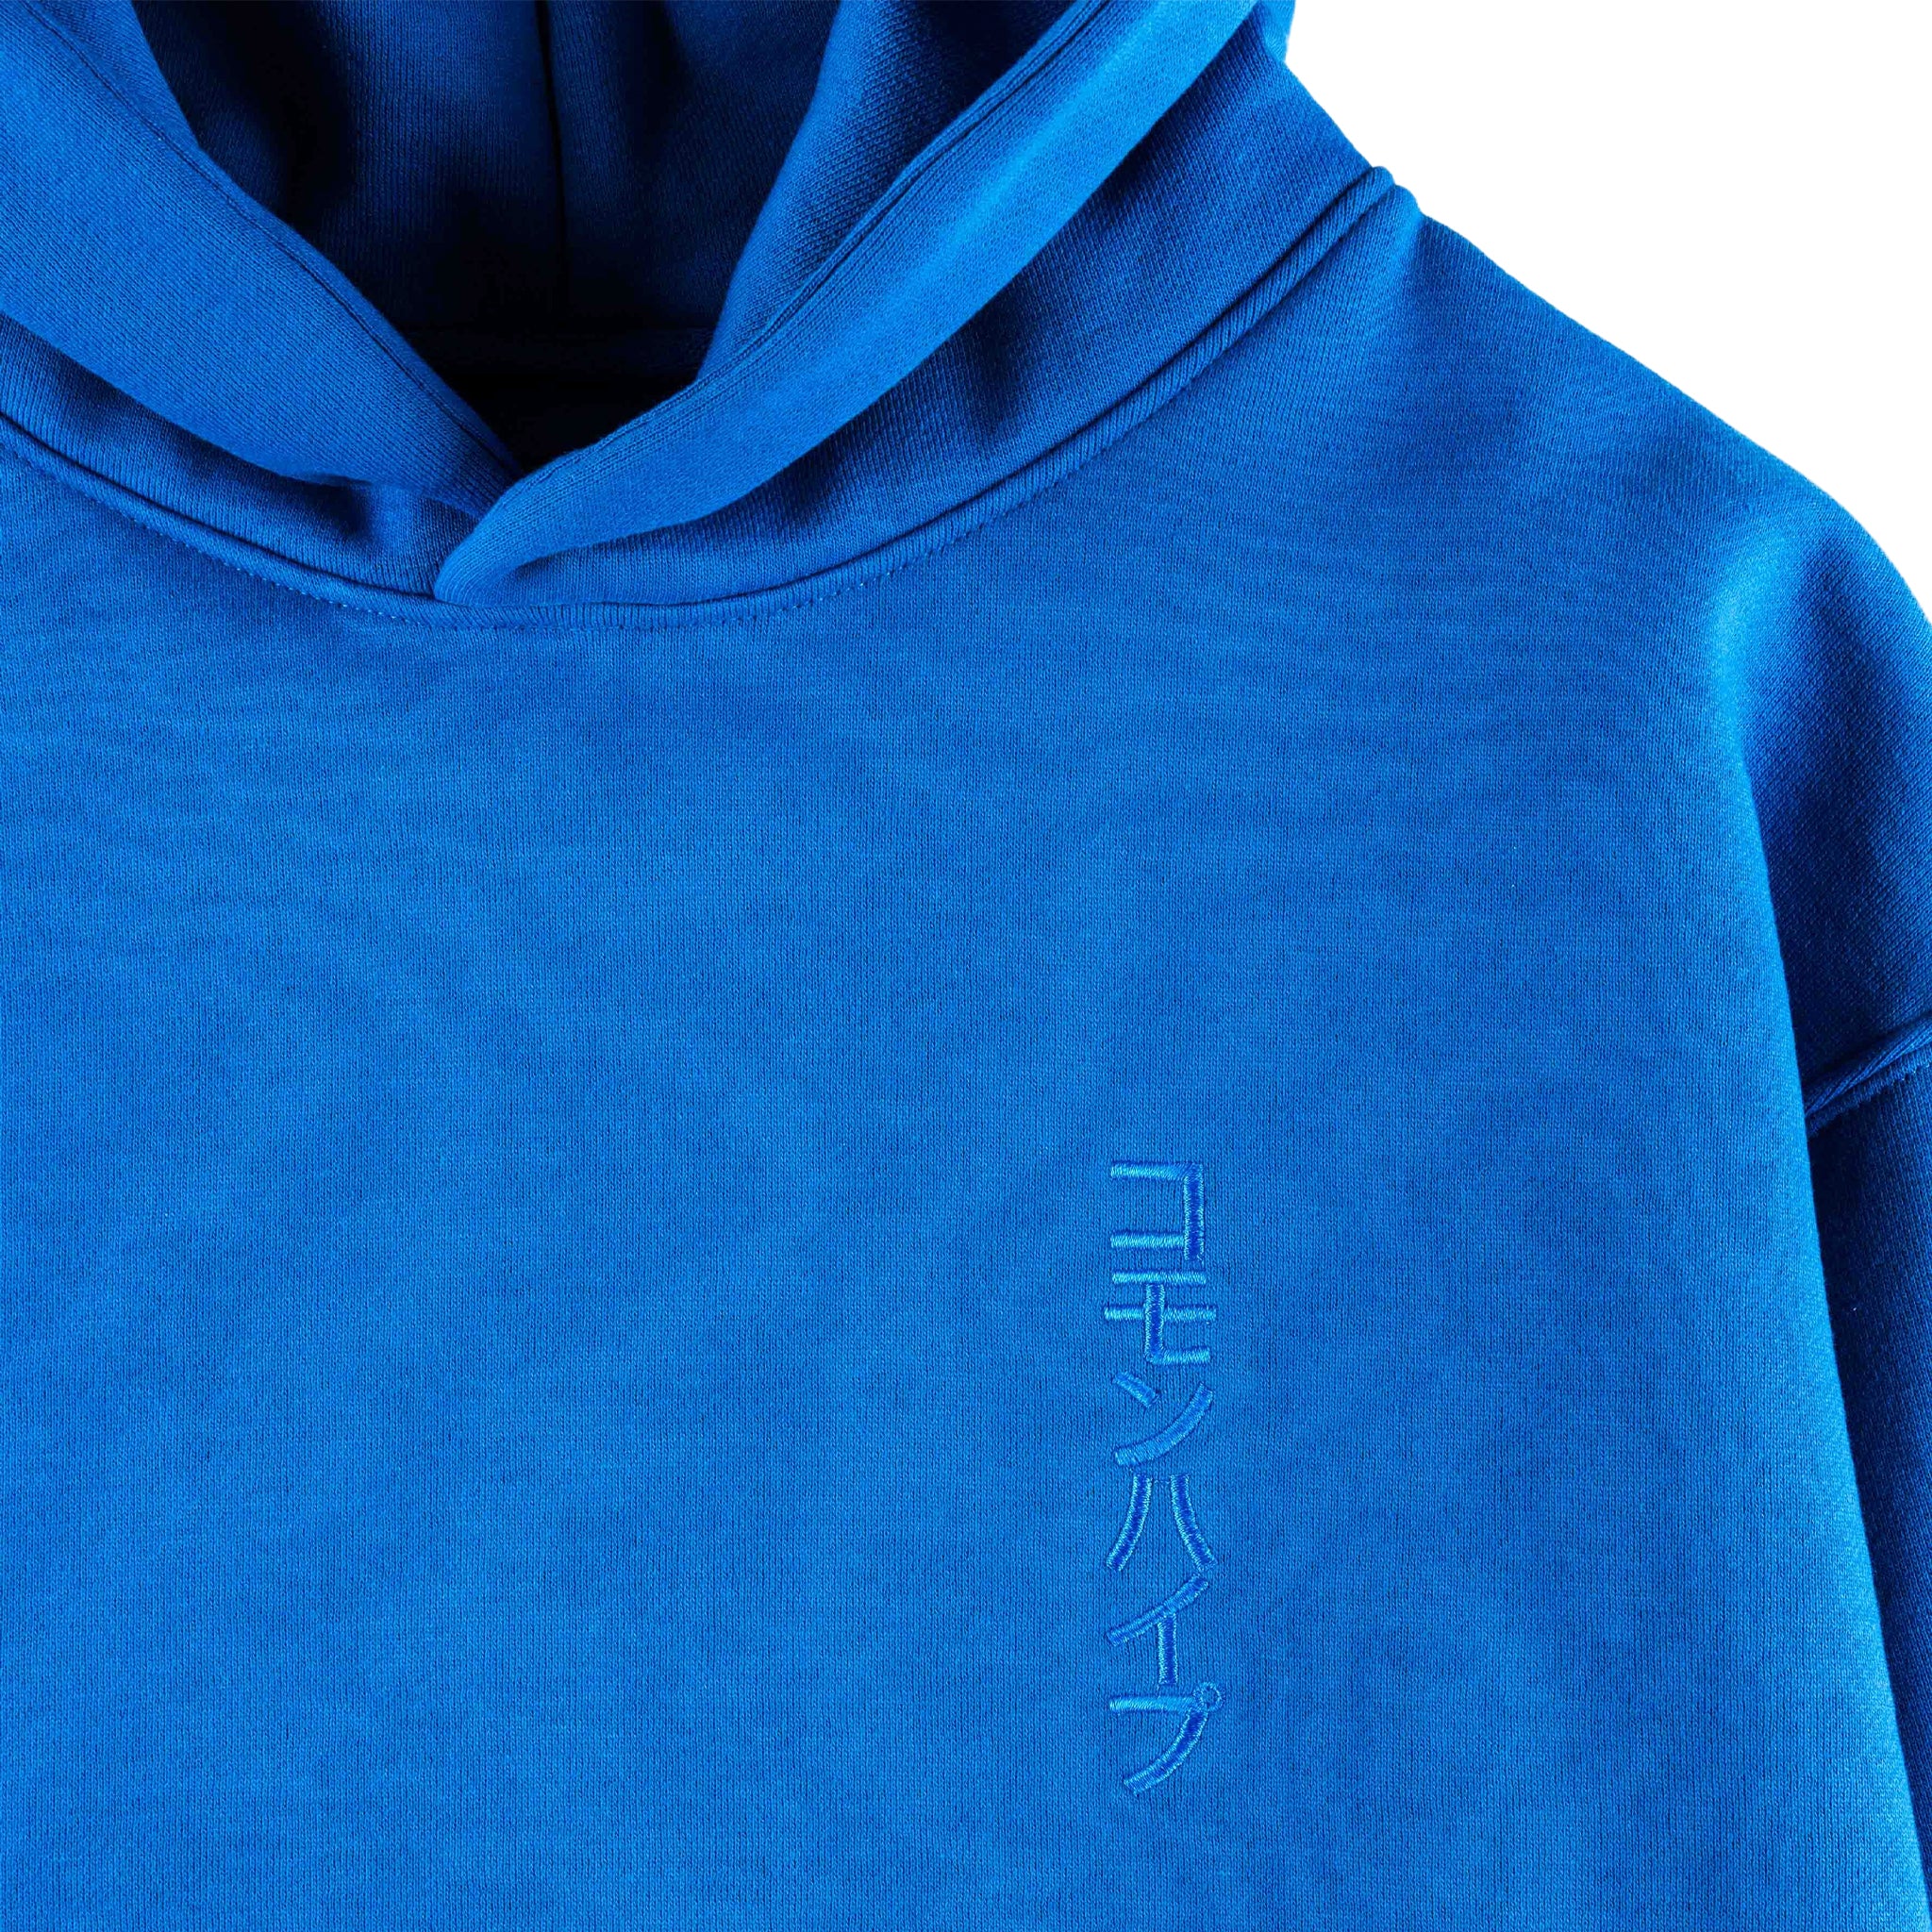 Common Hype Basic Hoodie ‘Classic Blue’